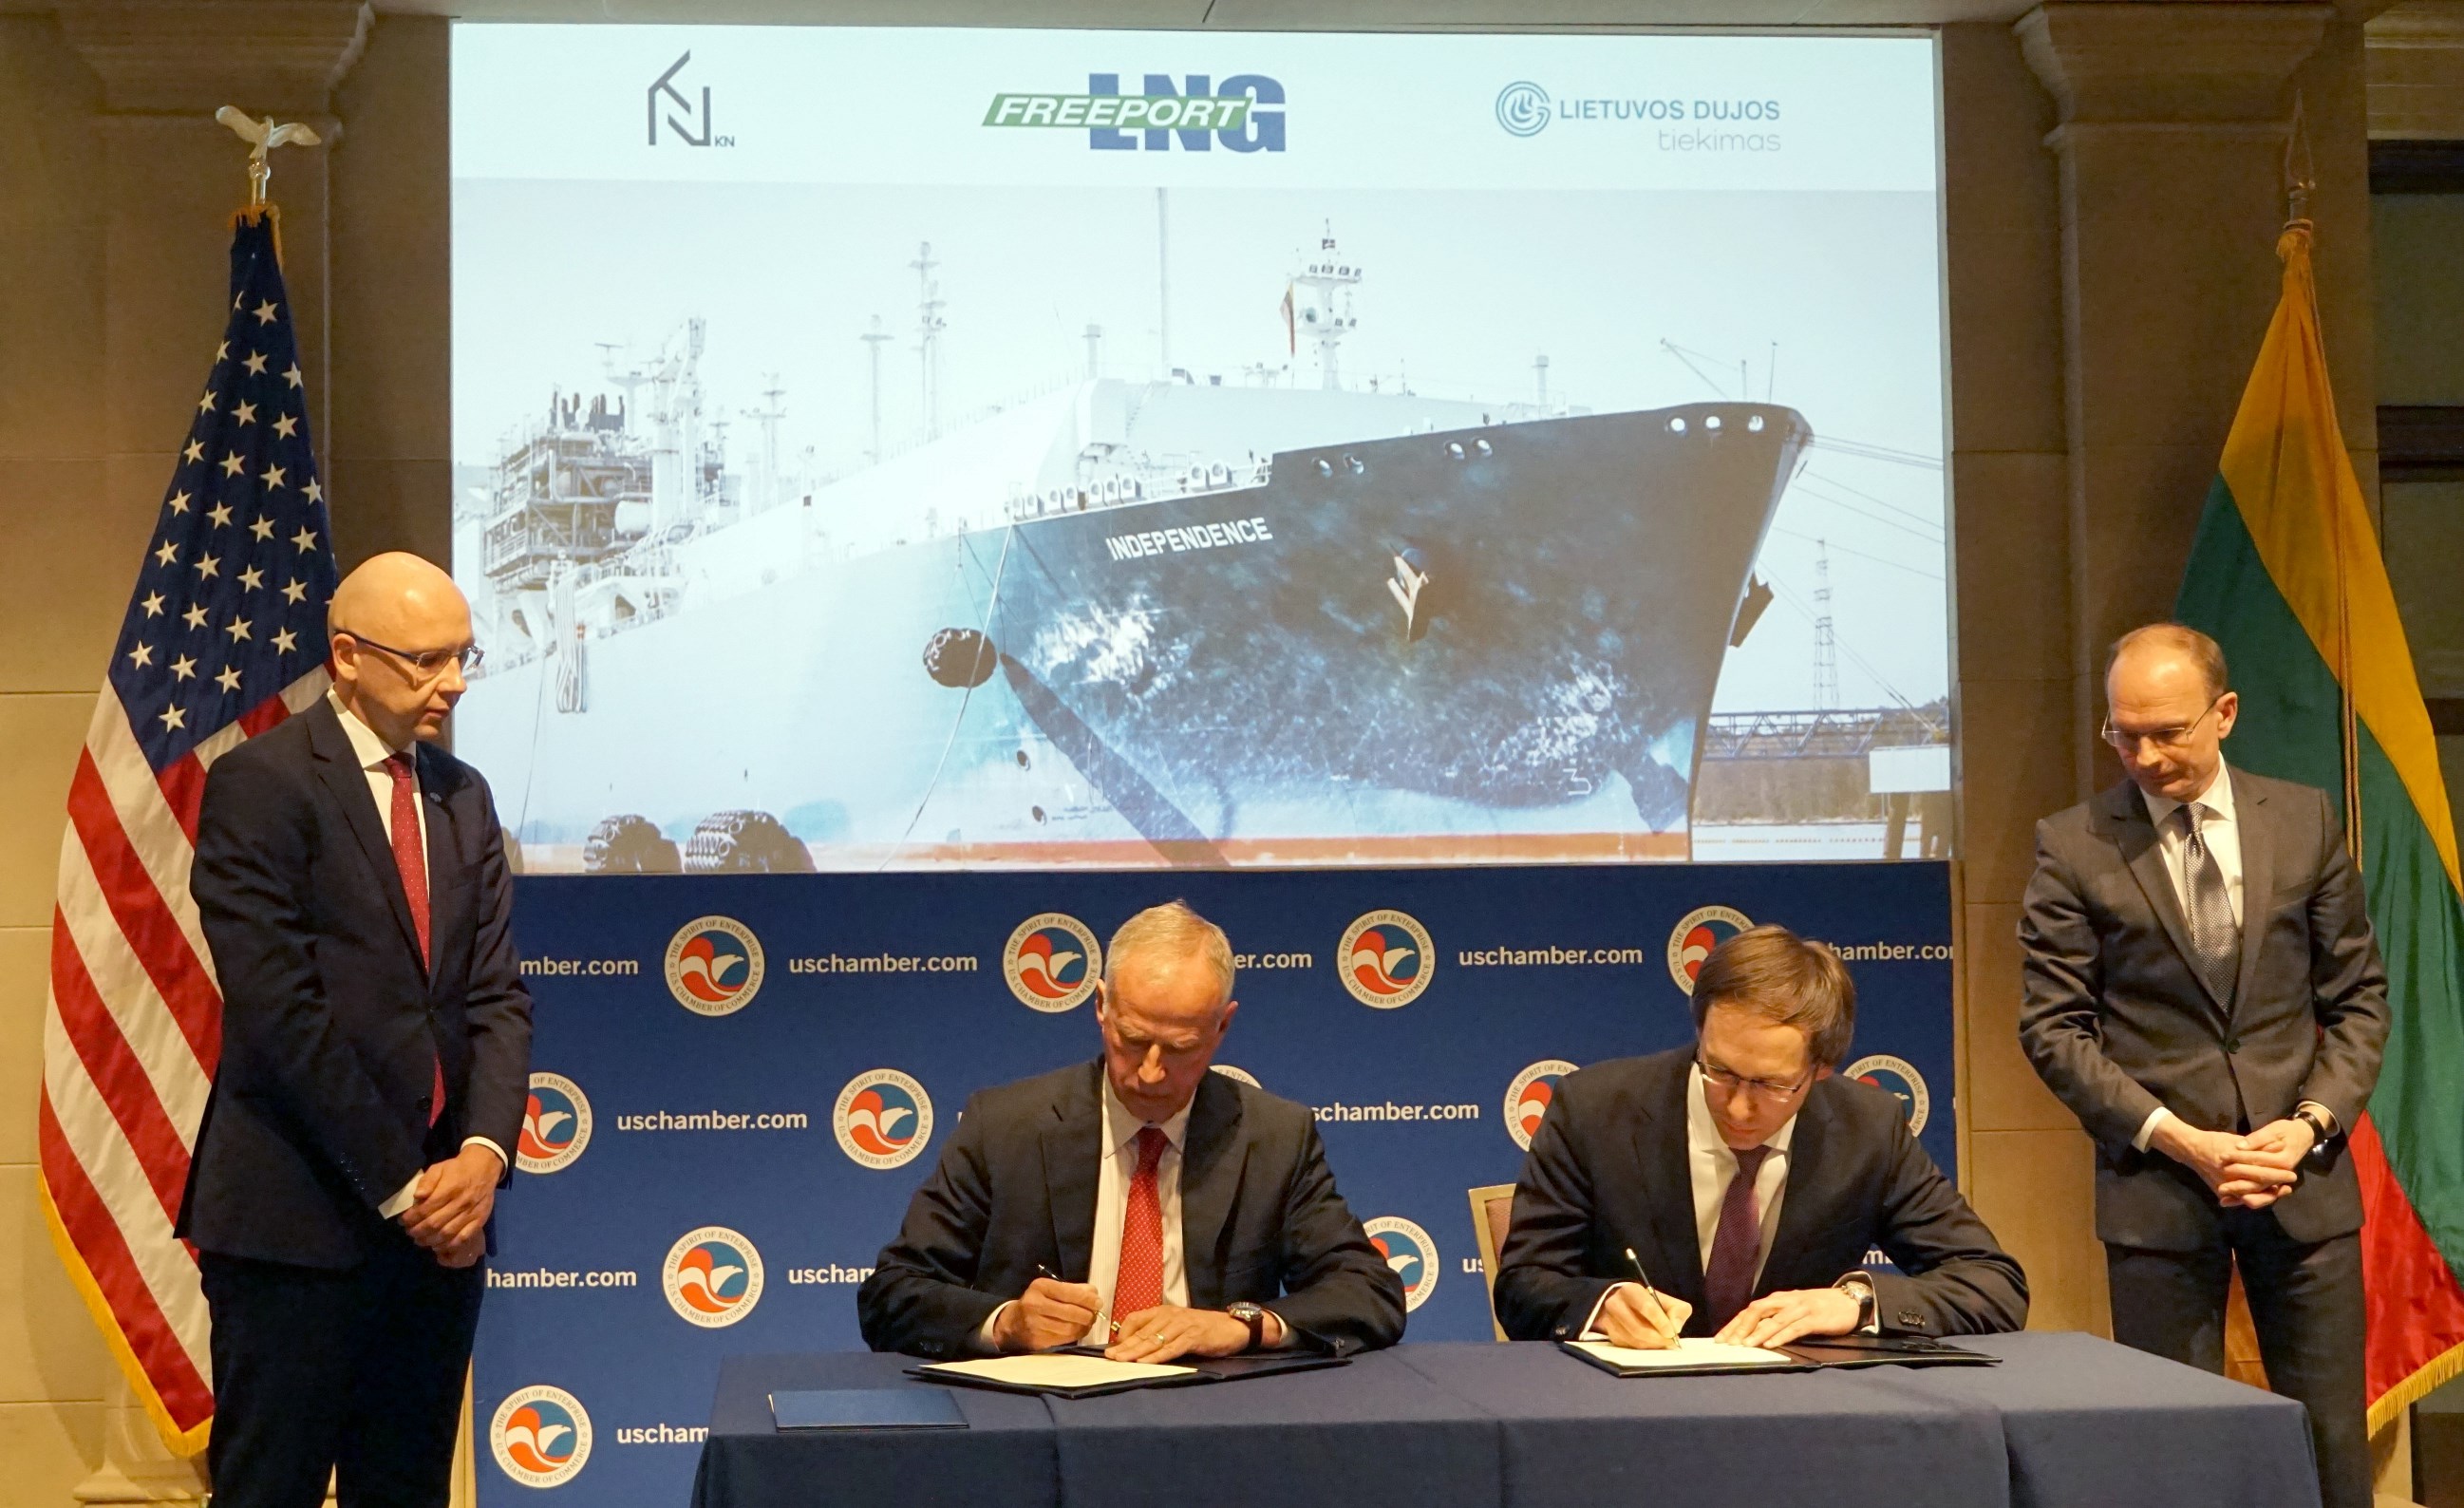 Lithuania's LDT signs MoU with Freeport LNG